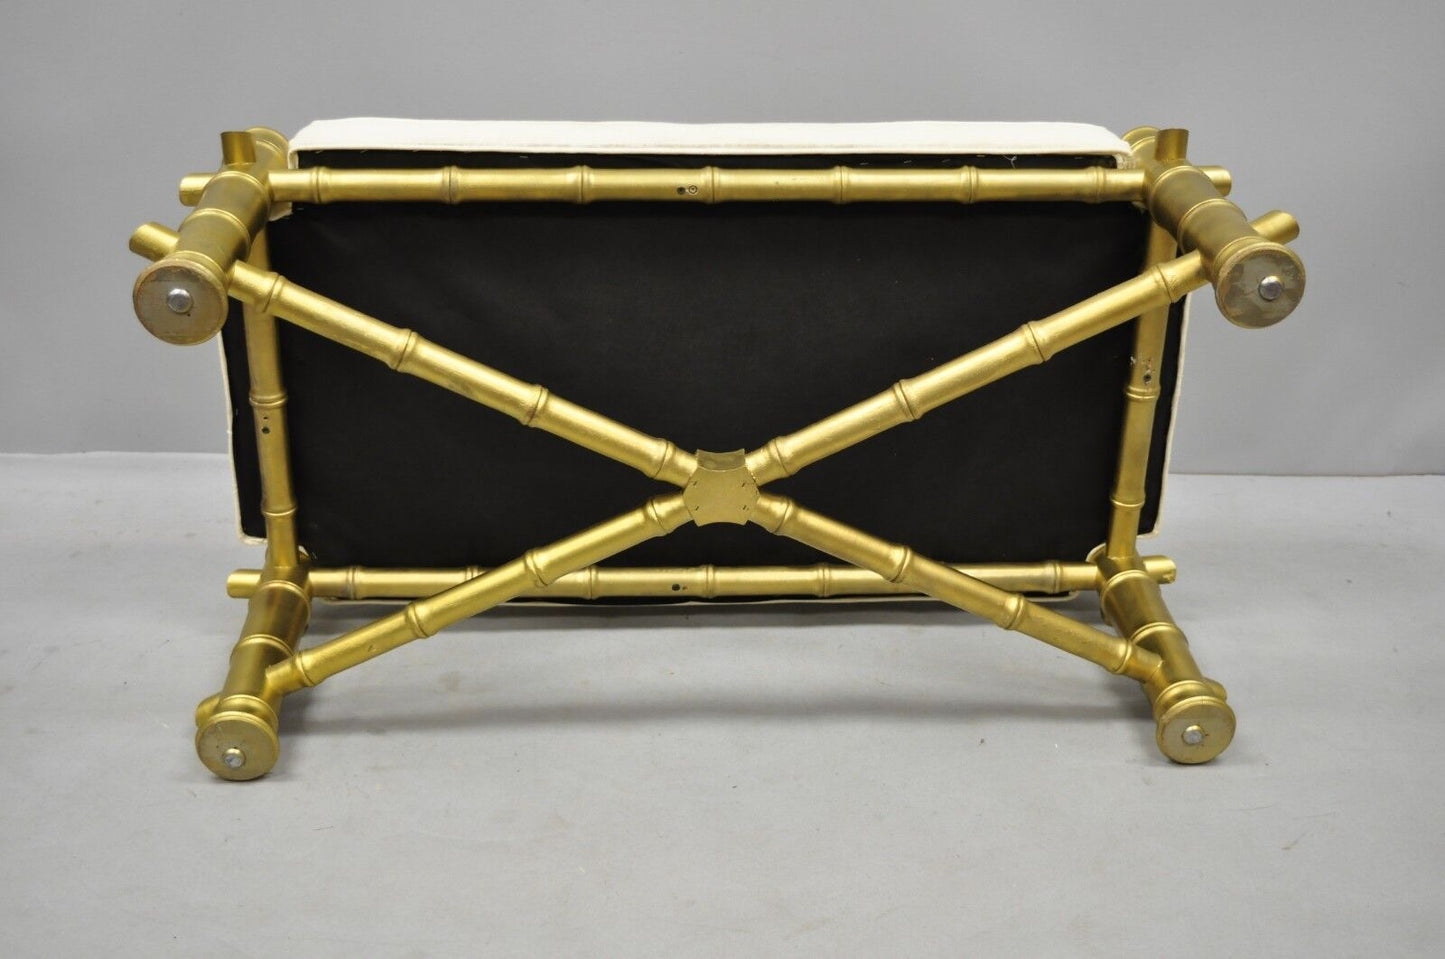 Vintage Gold Faux Bamboo Chinese Chippendale Style Upholstered X-Frame Bench